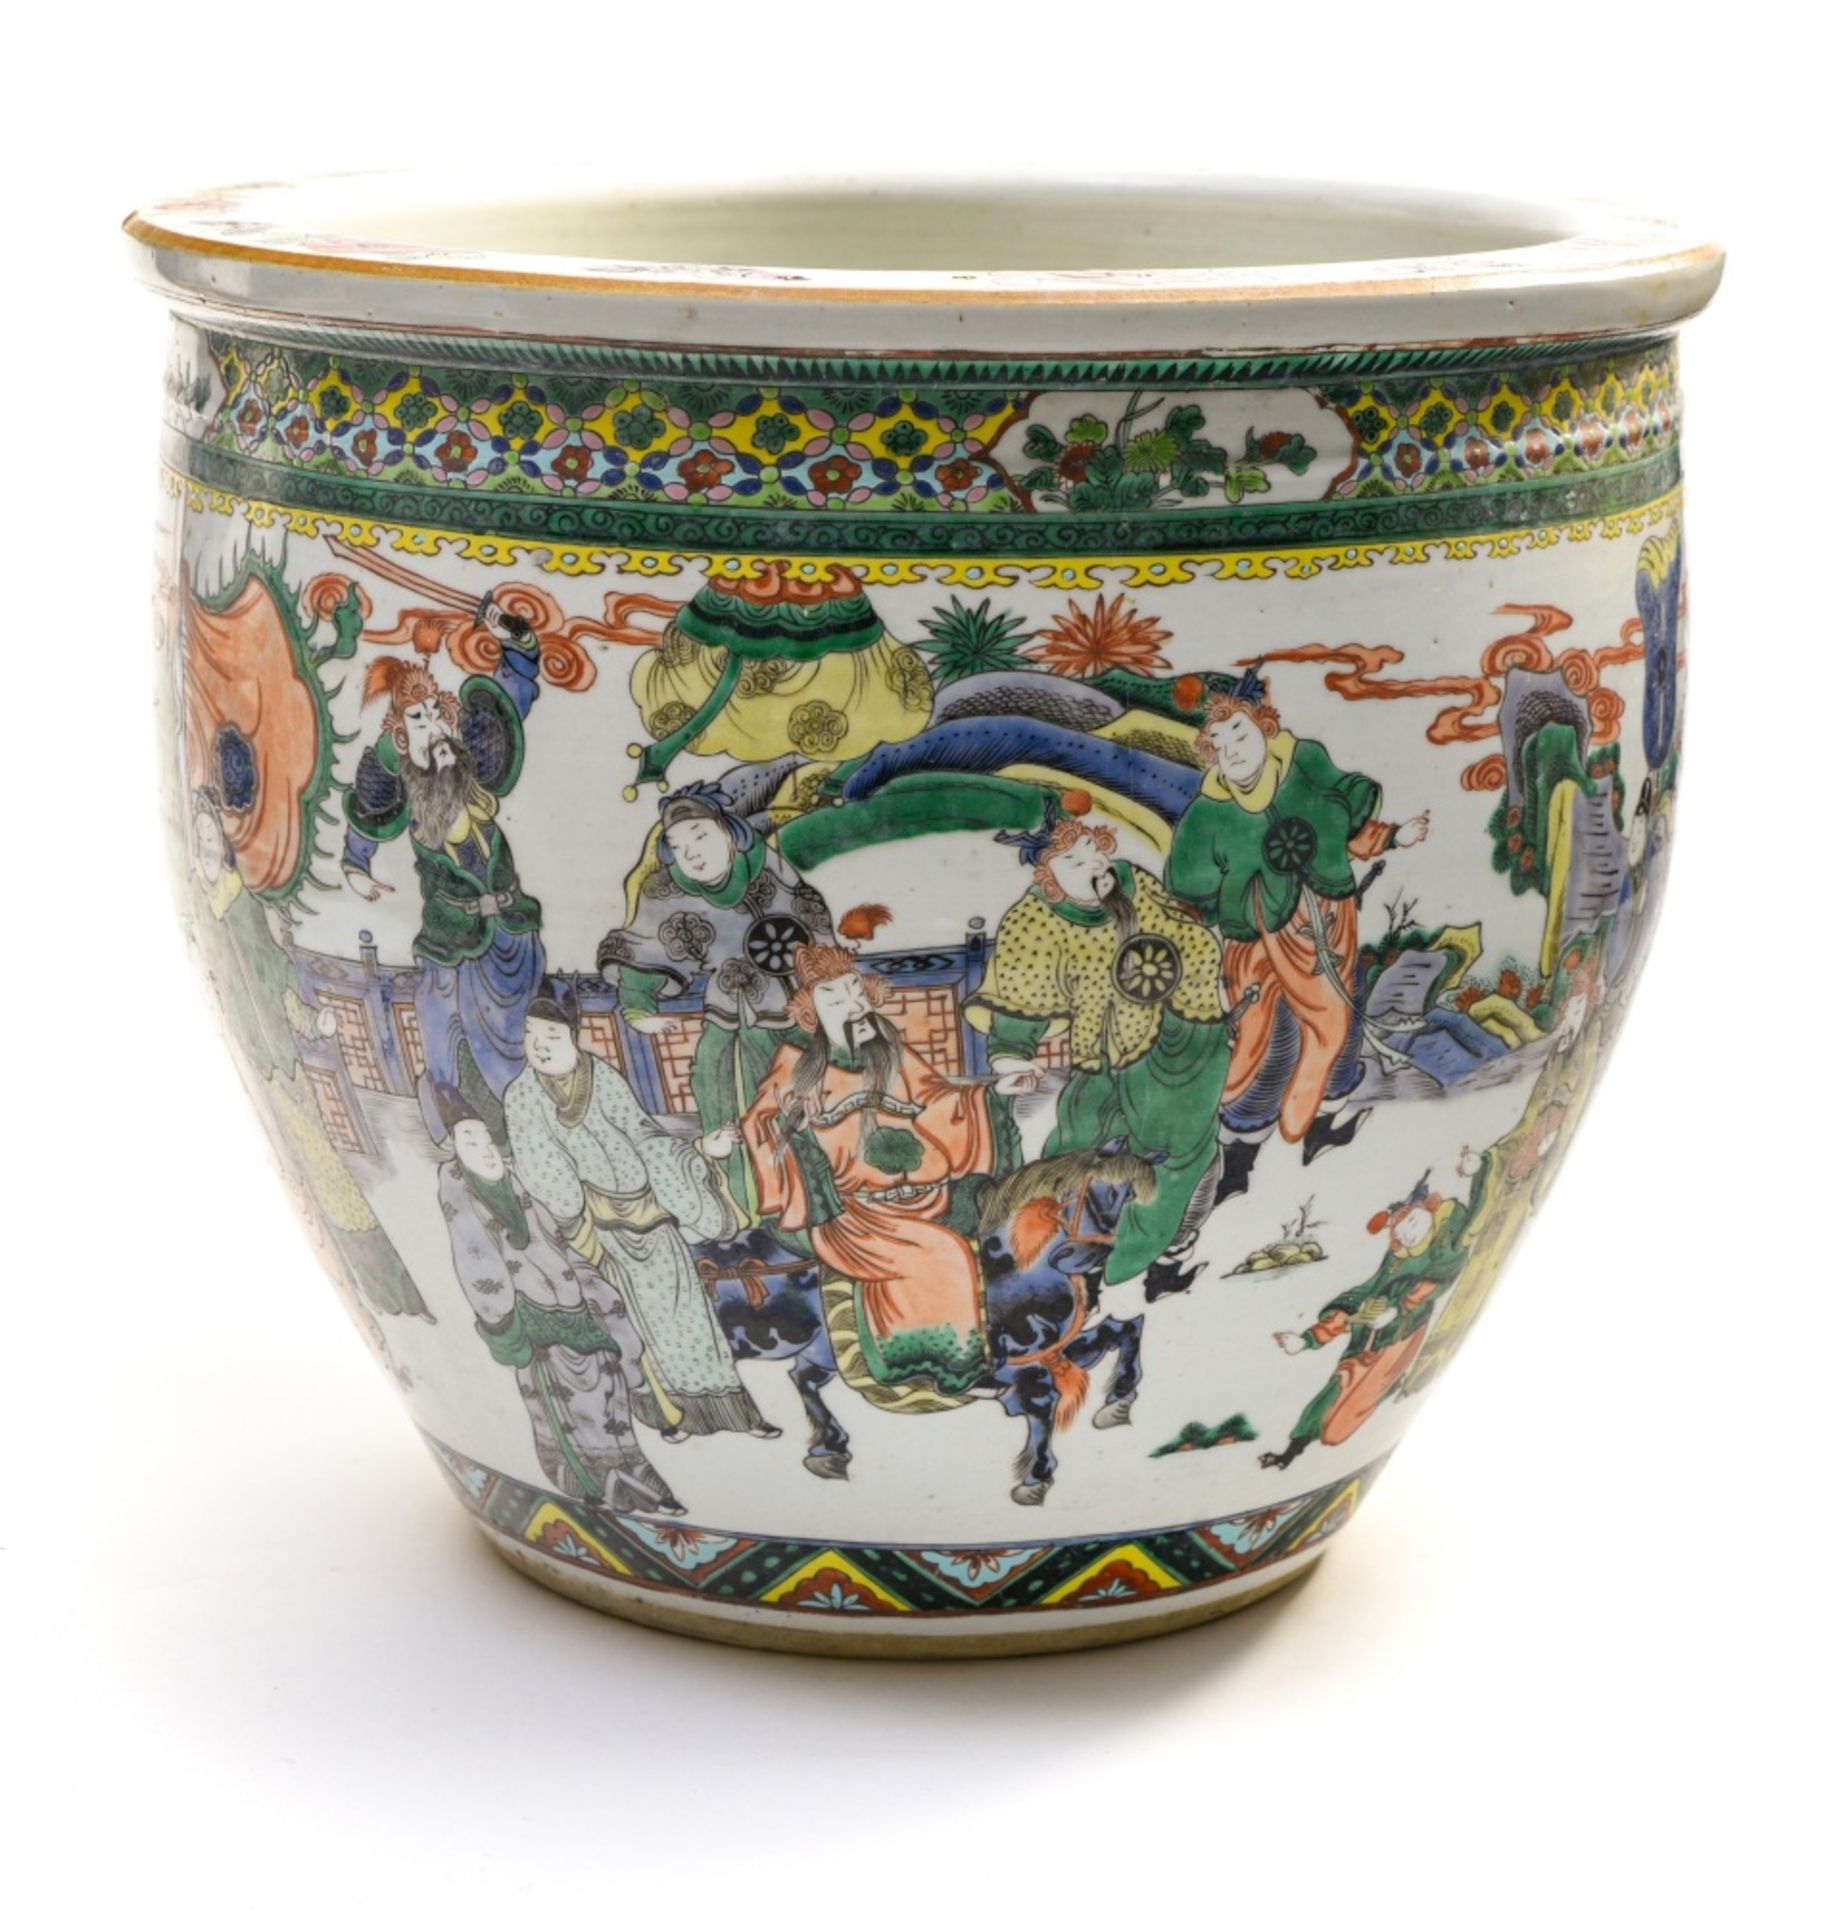 China, late 19th century, early 20th century Famille Verte planter or aquarium, Porcelain decorated - Image 4 of 7